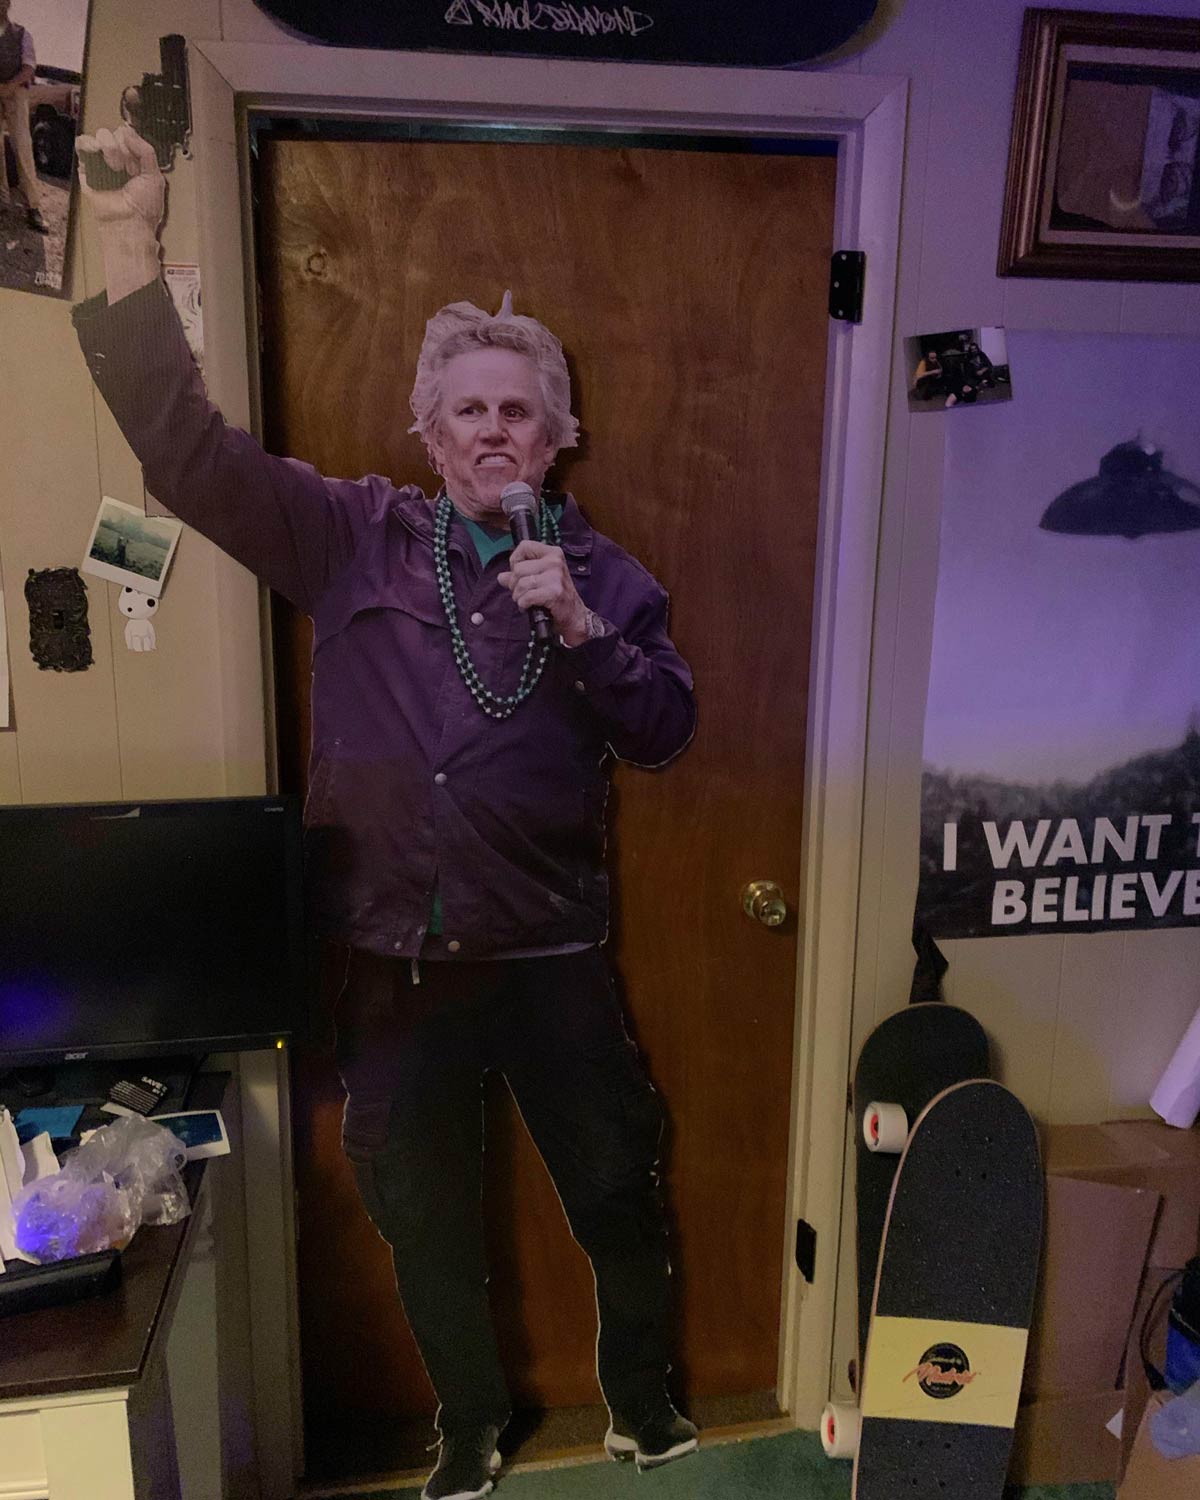 I made a life sized Gary Busey cutout for a white elephant exchange, but it was cancelled. Now I have a life sized Gary Busey cutout